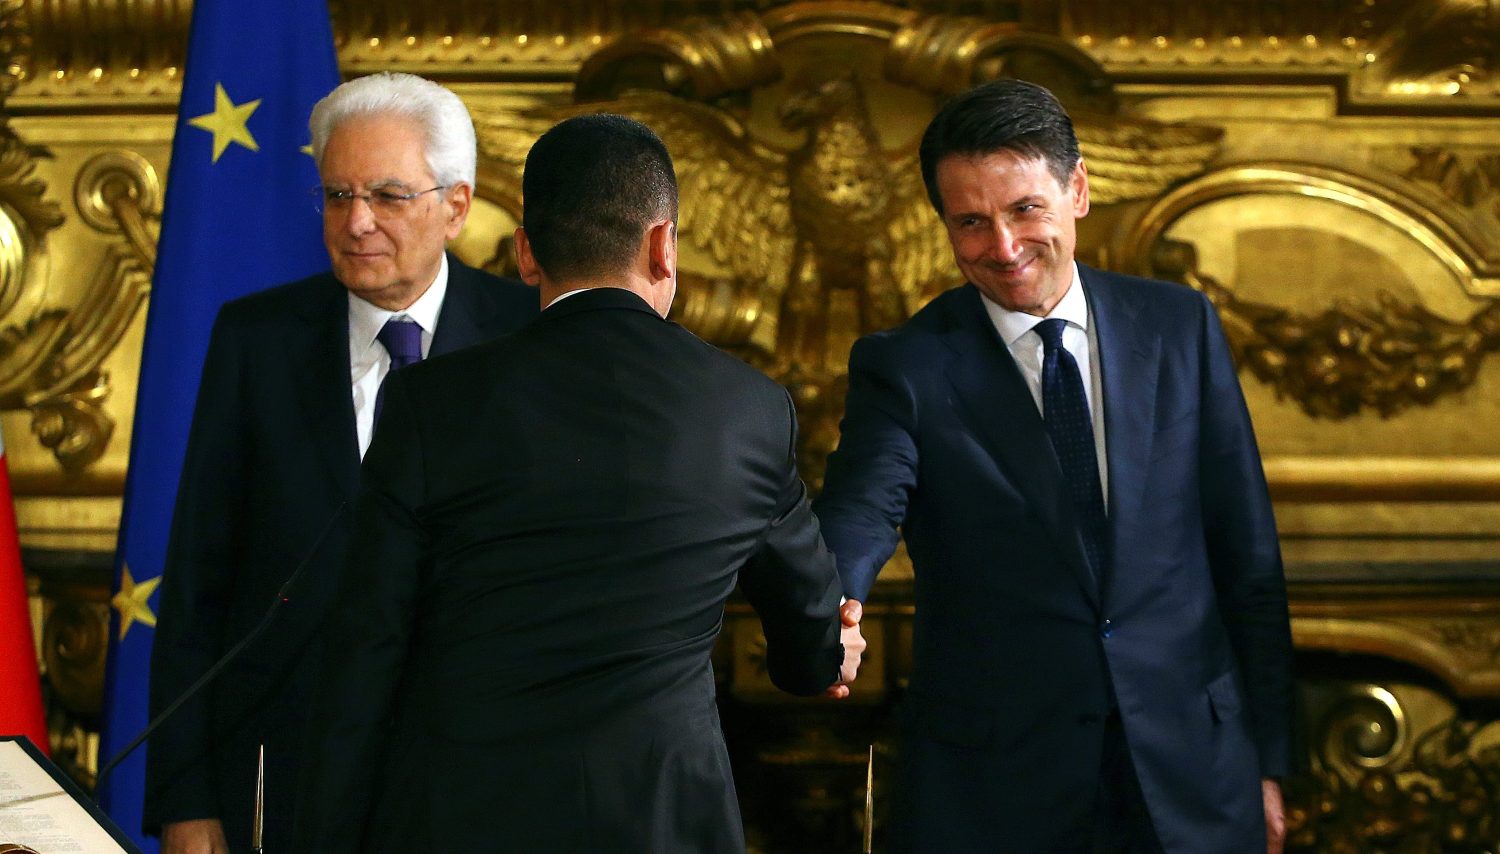 Italy's Prime Minister Giuseppe Conte shakes hands with Italy's Minister of Labor and Industry Luigi Di Maio during the sworn-in ceremony at the Quirinal palace in Rome, Italy, June 1, 2018.  REUTERS/Tony Gentile - RC1DCB9D11A0